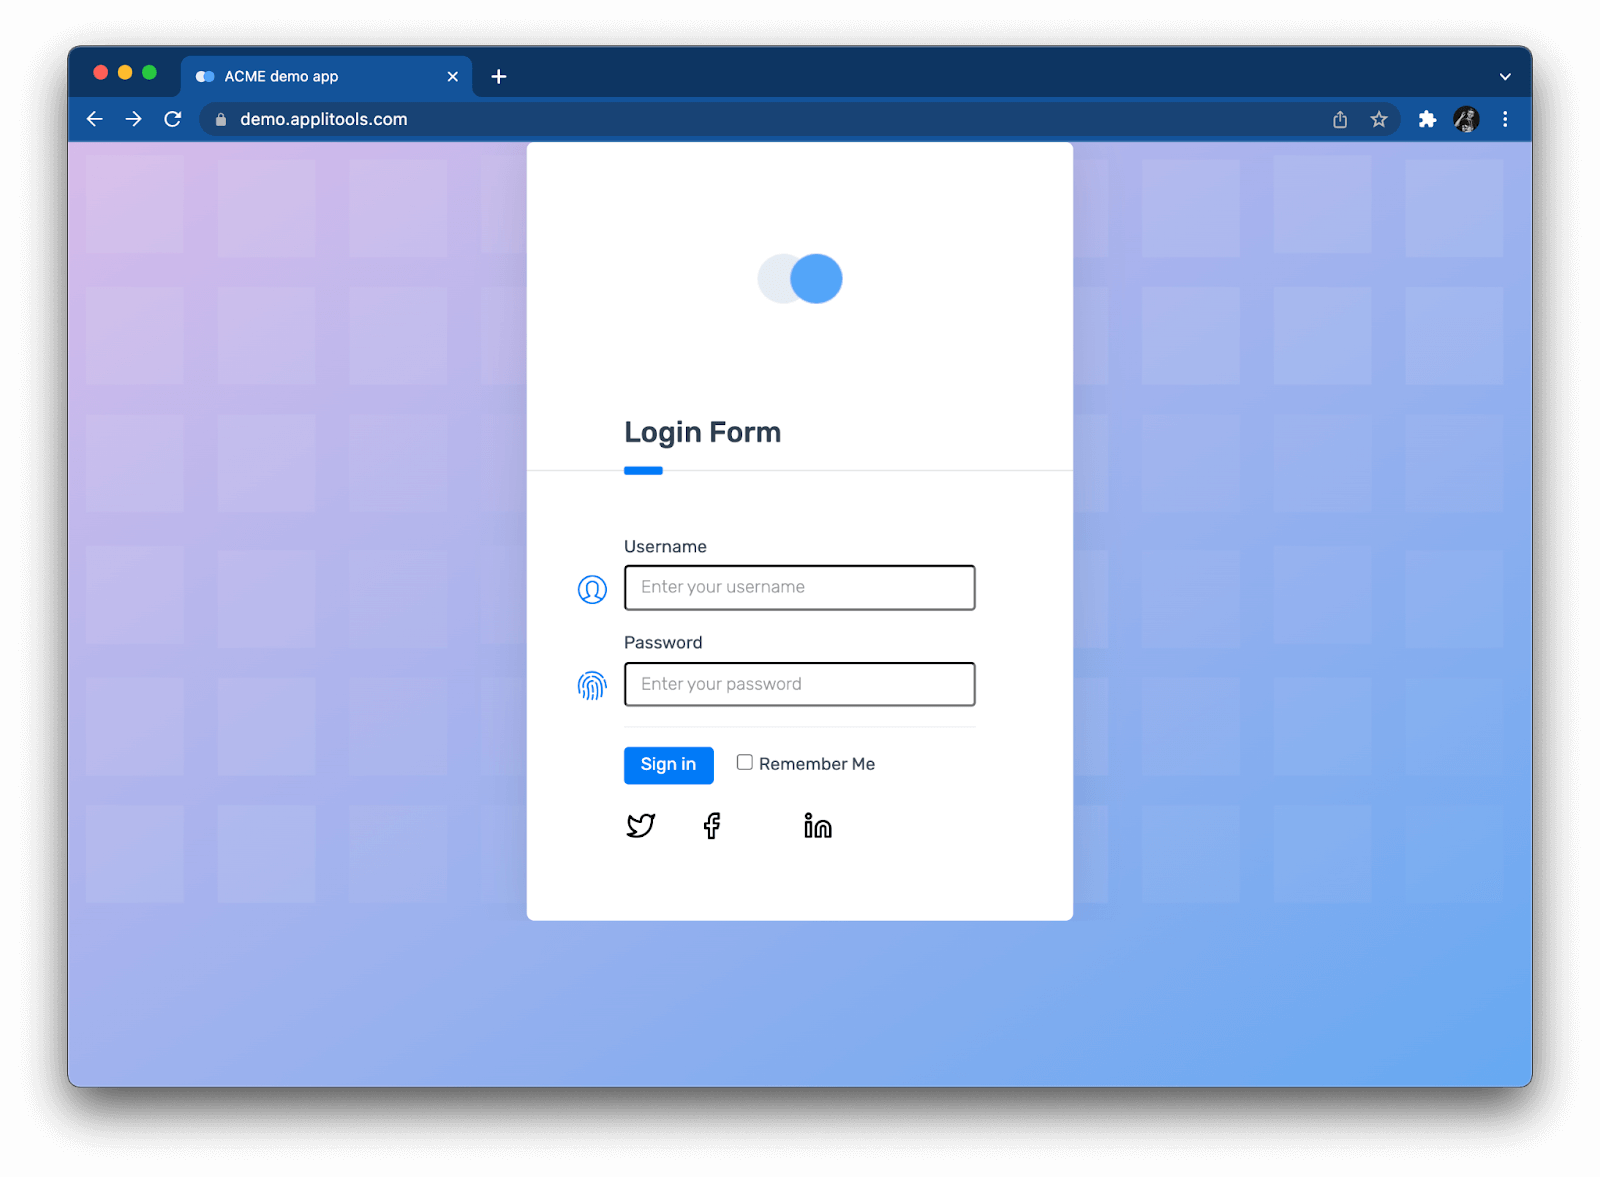 A demo login form, with a username field, password field, and a few other selectable items.